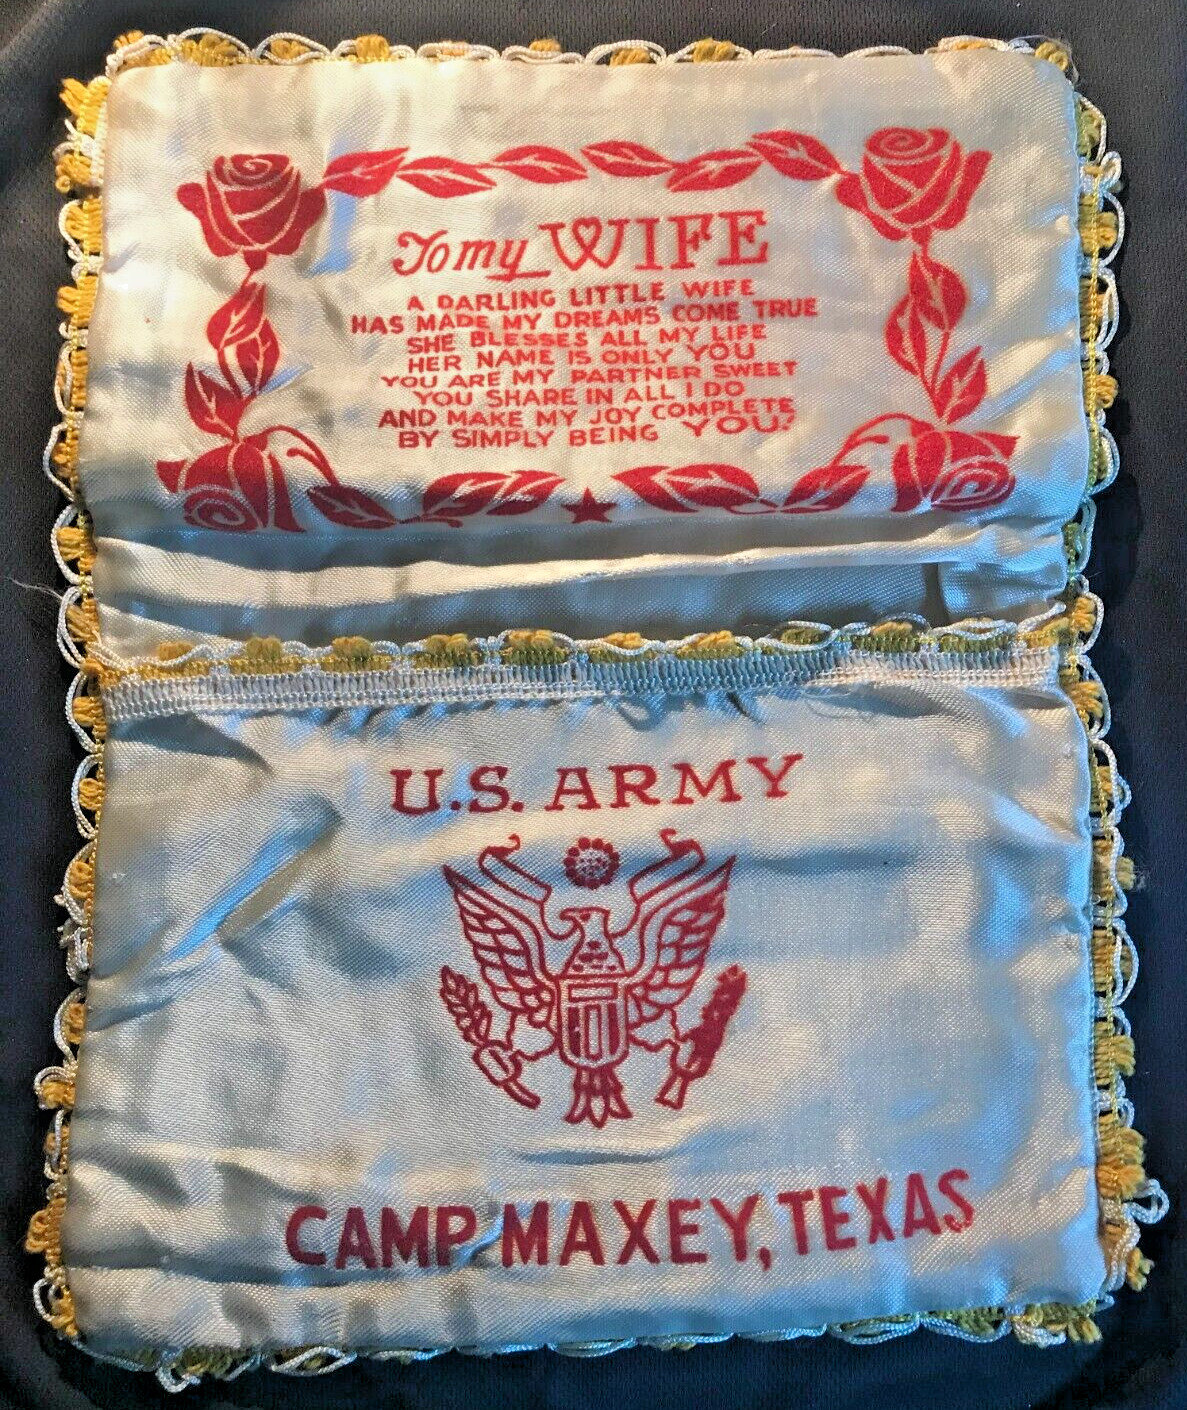 WWII era Satin WIFE Souvenir Pillow Cover US ARMY Camp MAXEY TEXAS, AS IS